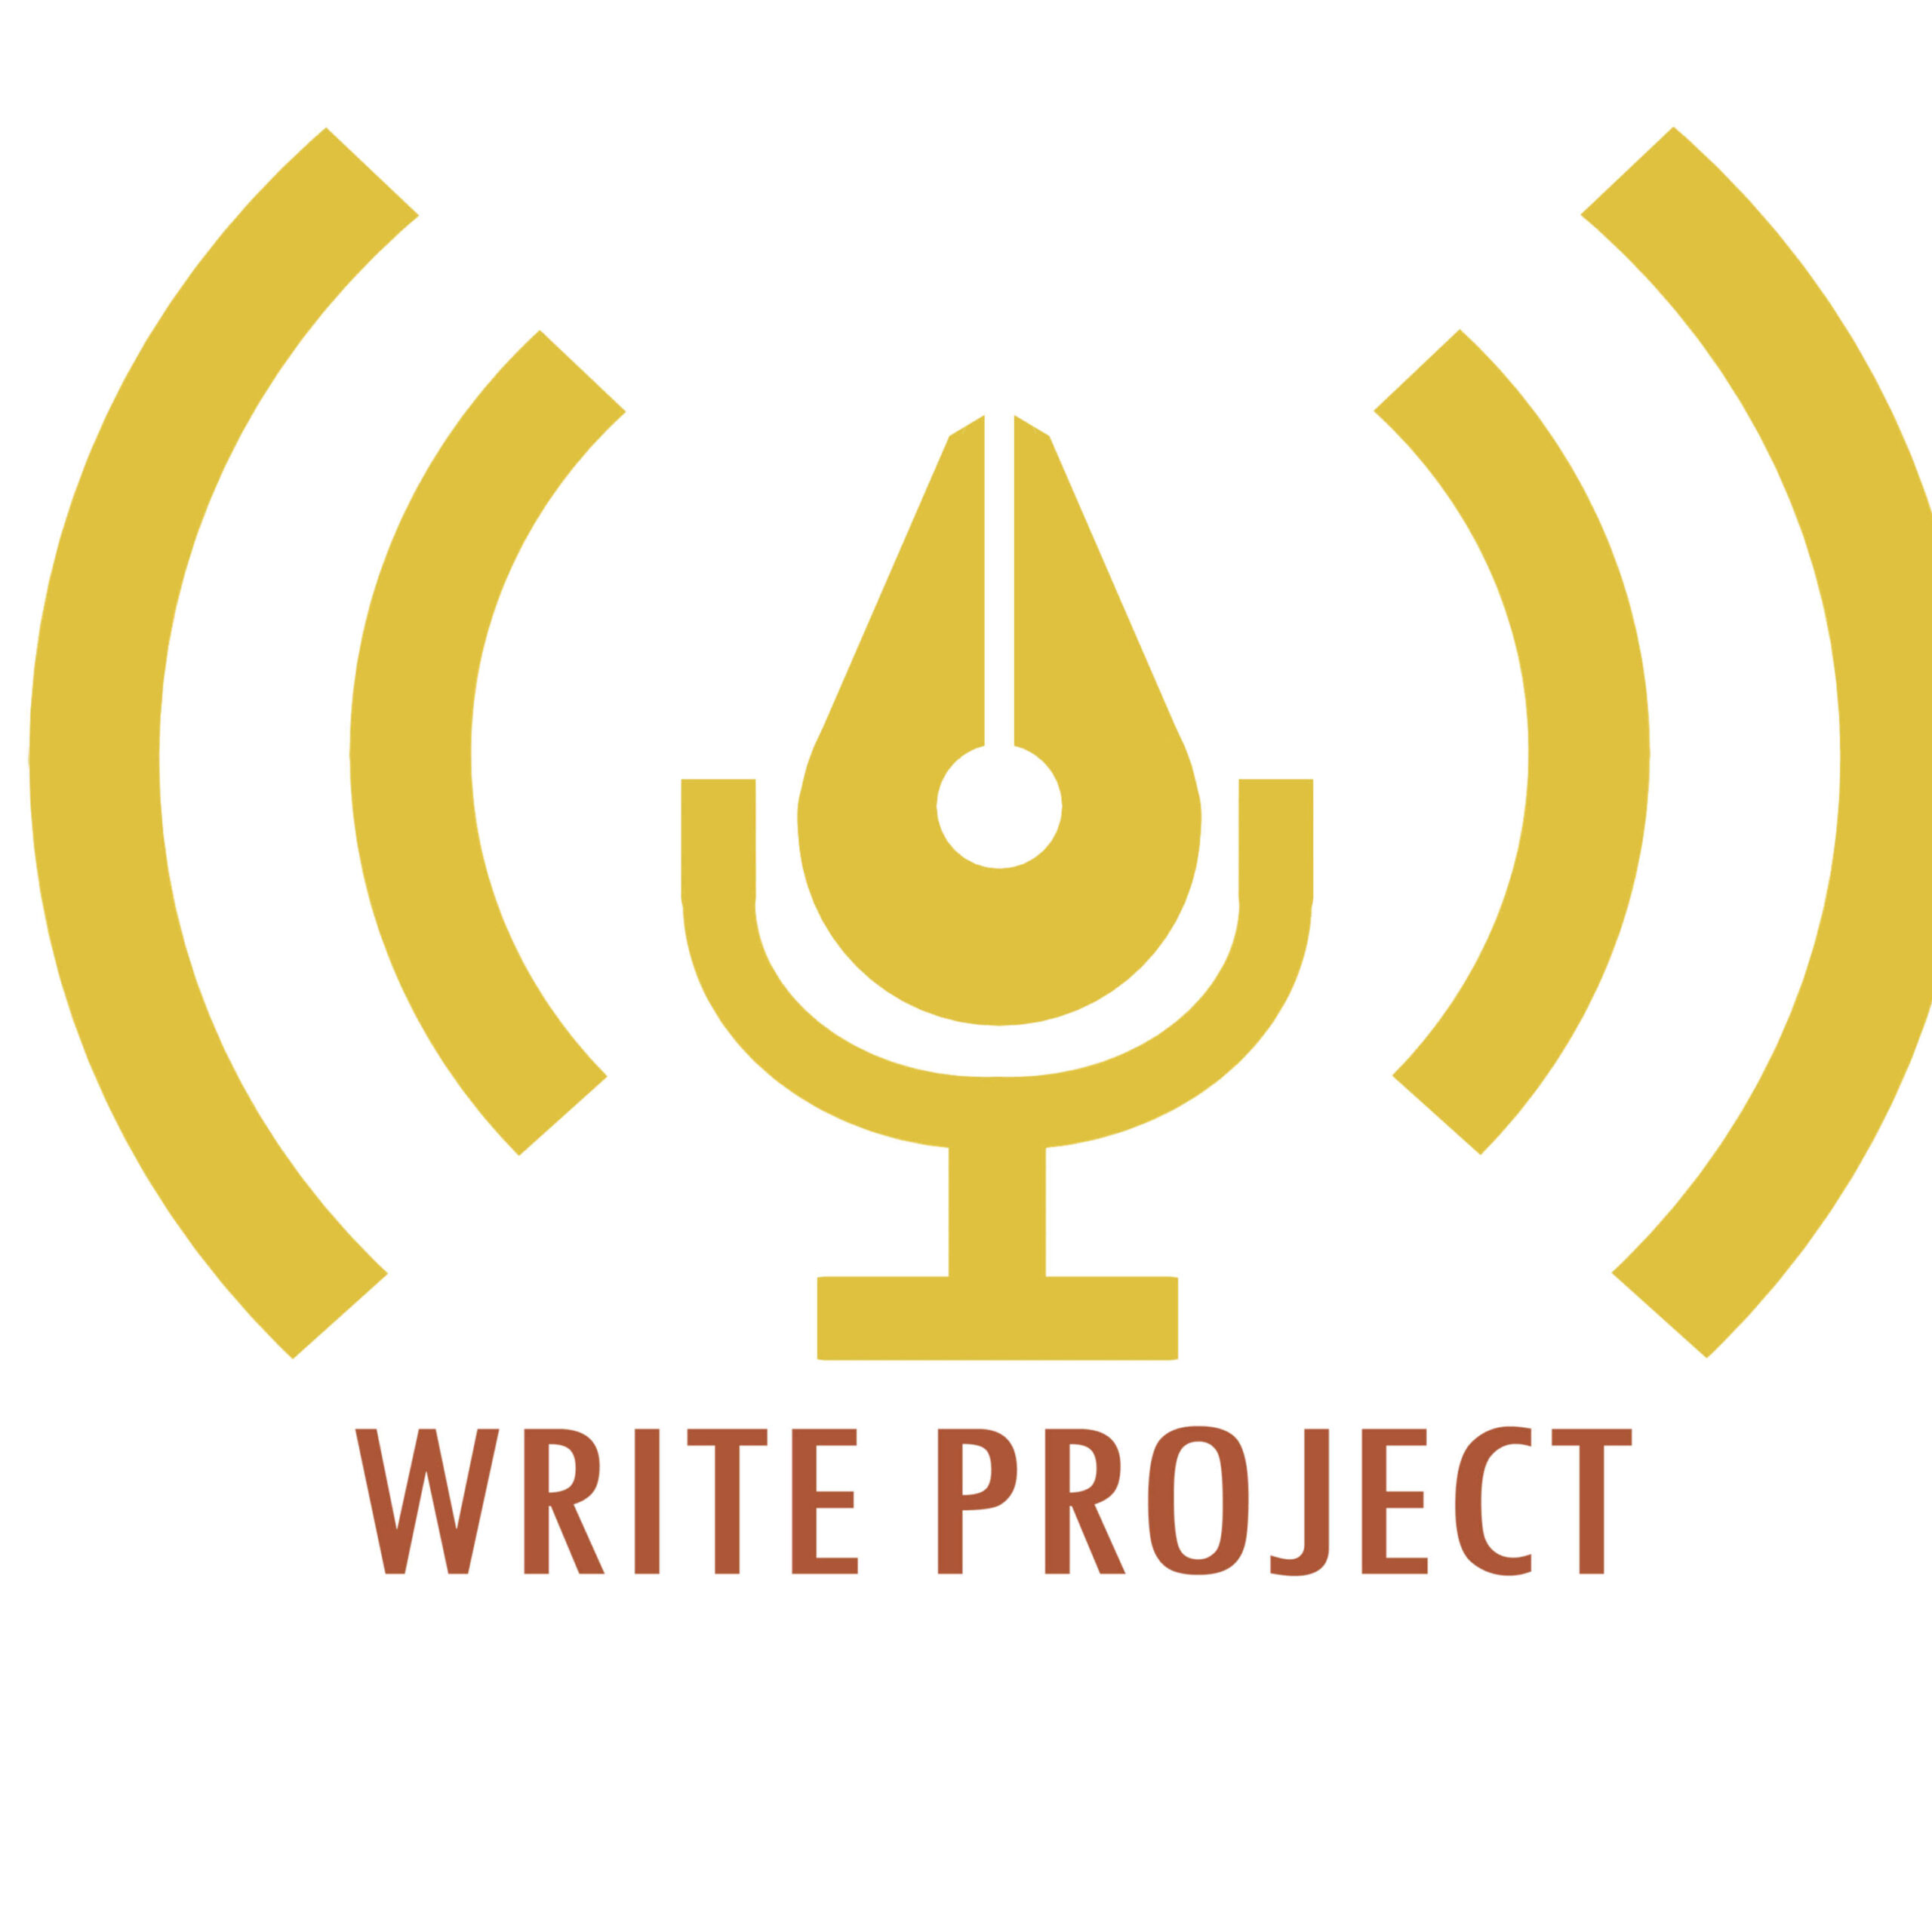 The Write Project